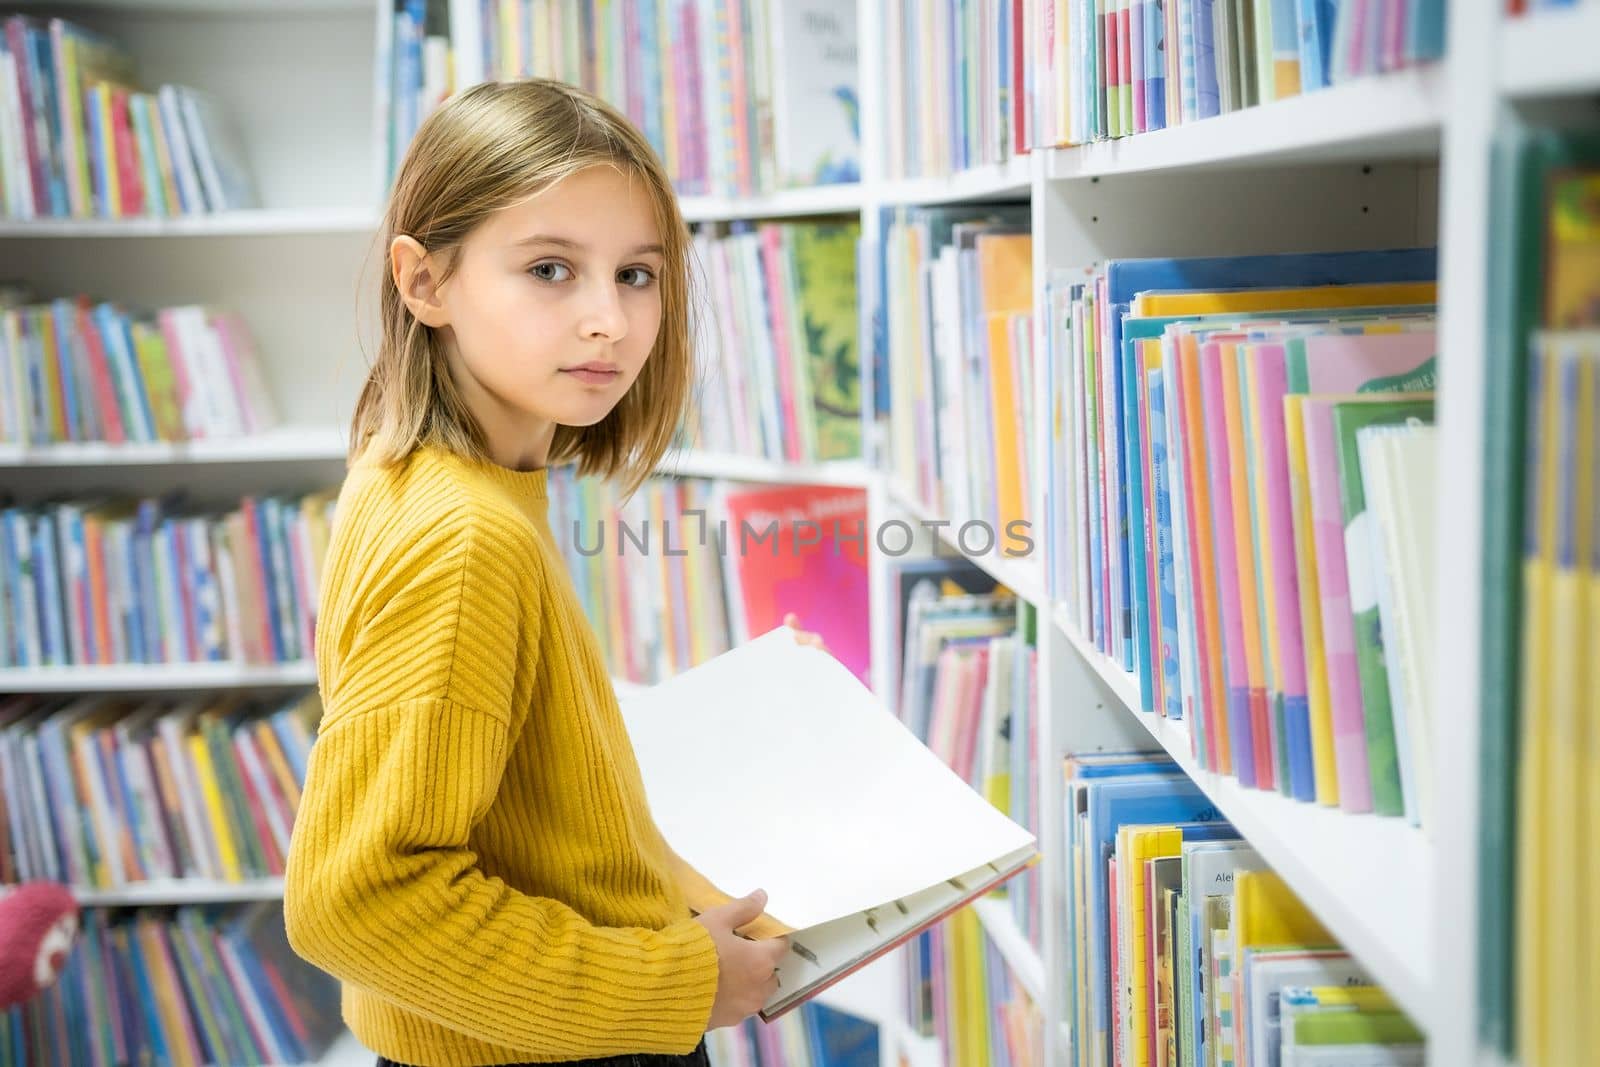 Schoolgirl choosing book in school library. Smart girl selecting literature for reading. Books on shelves in bookstore. Learning from books. School education. Benefits of everyday reading